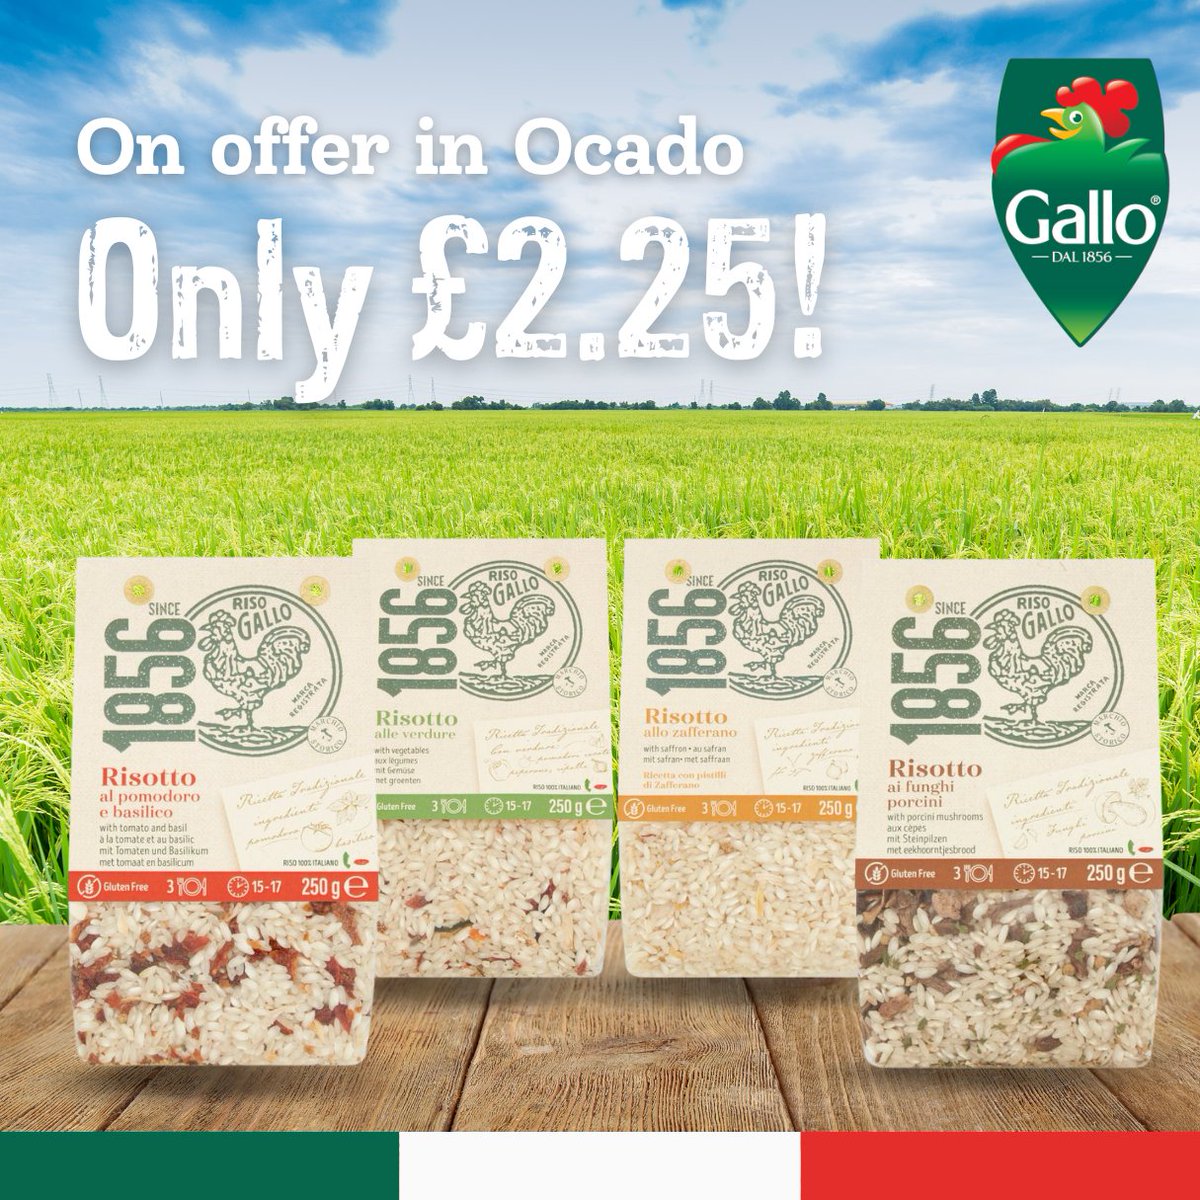 1856 is on offer in @ocado for only £2.25! The 1856 risottos are made using authentic recipes, blending premium dried ingredients with top-quality Carnaroli rice. #supermarketoffer #supermarket #supermarketdeal #ocado #ocadooffer #offerinocado